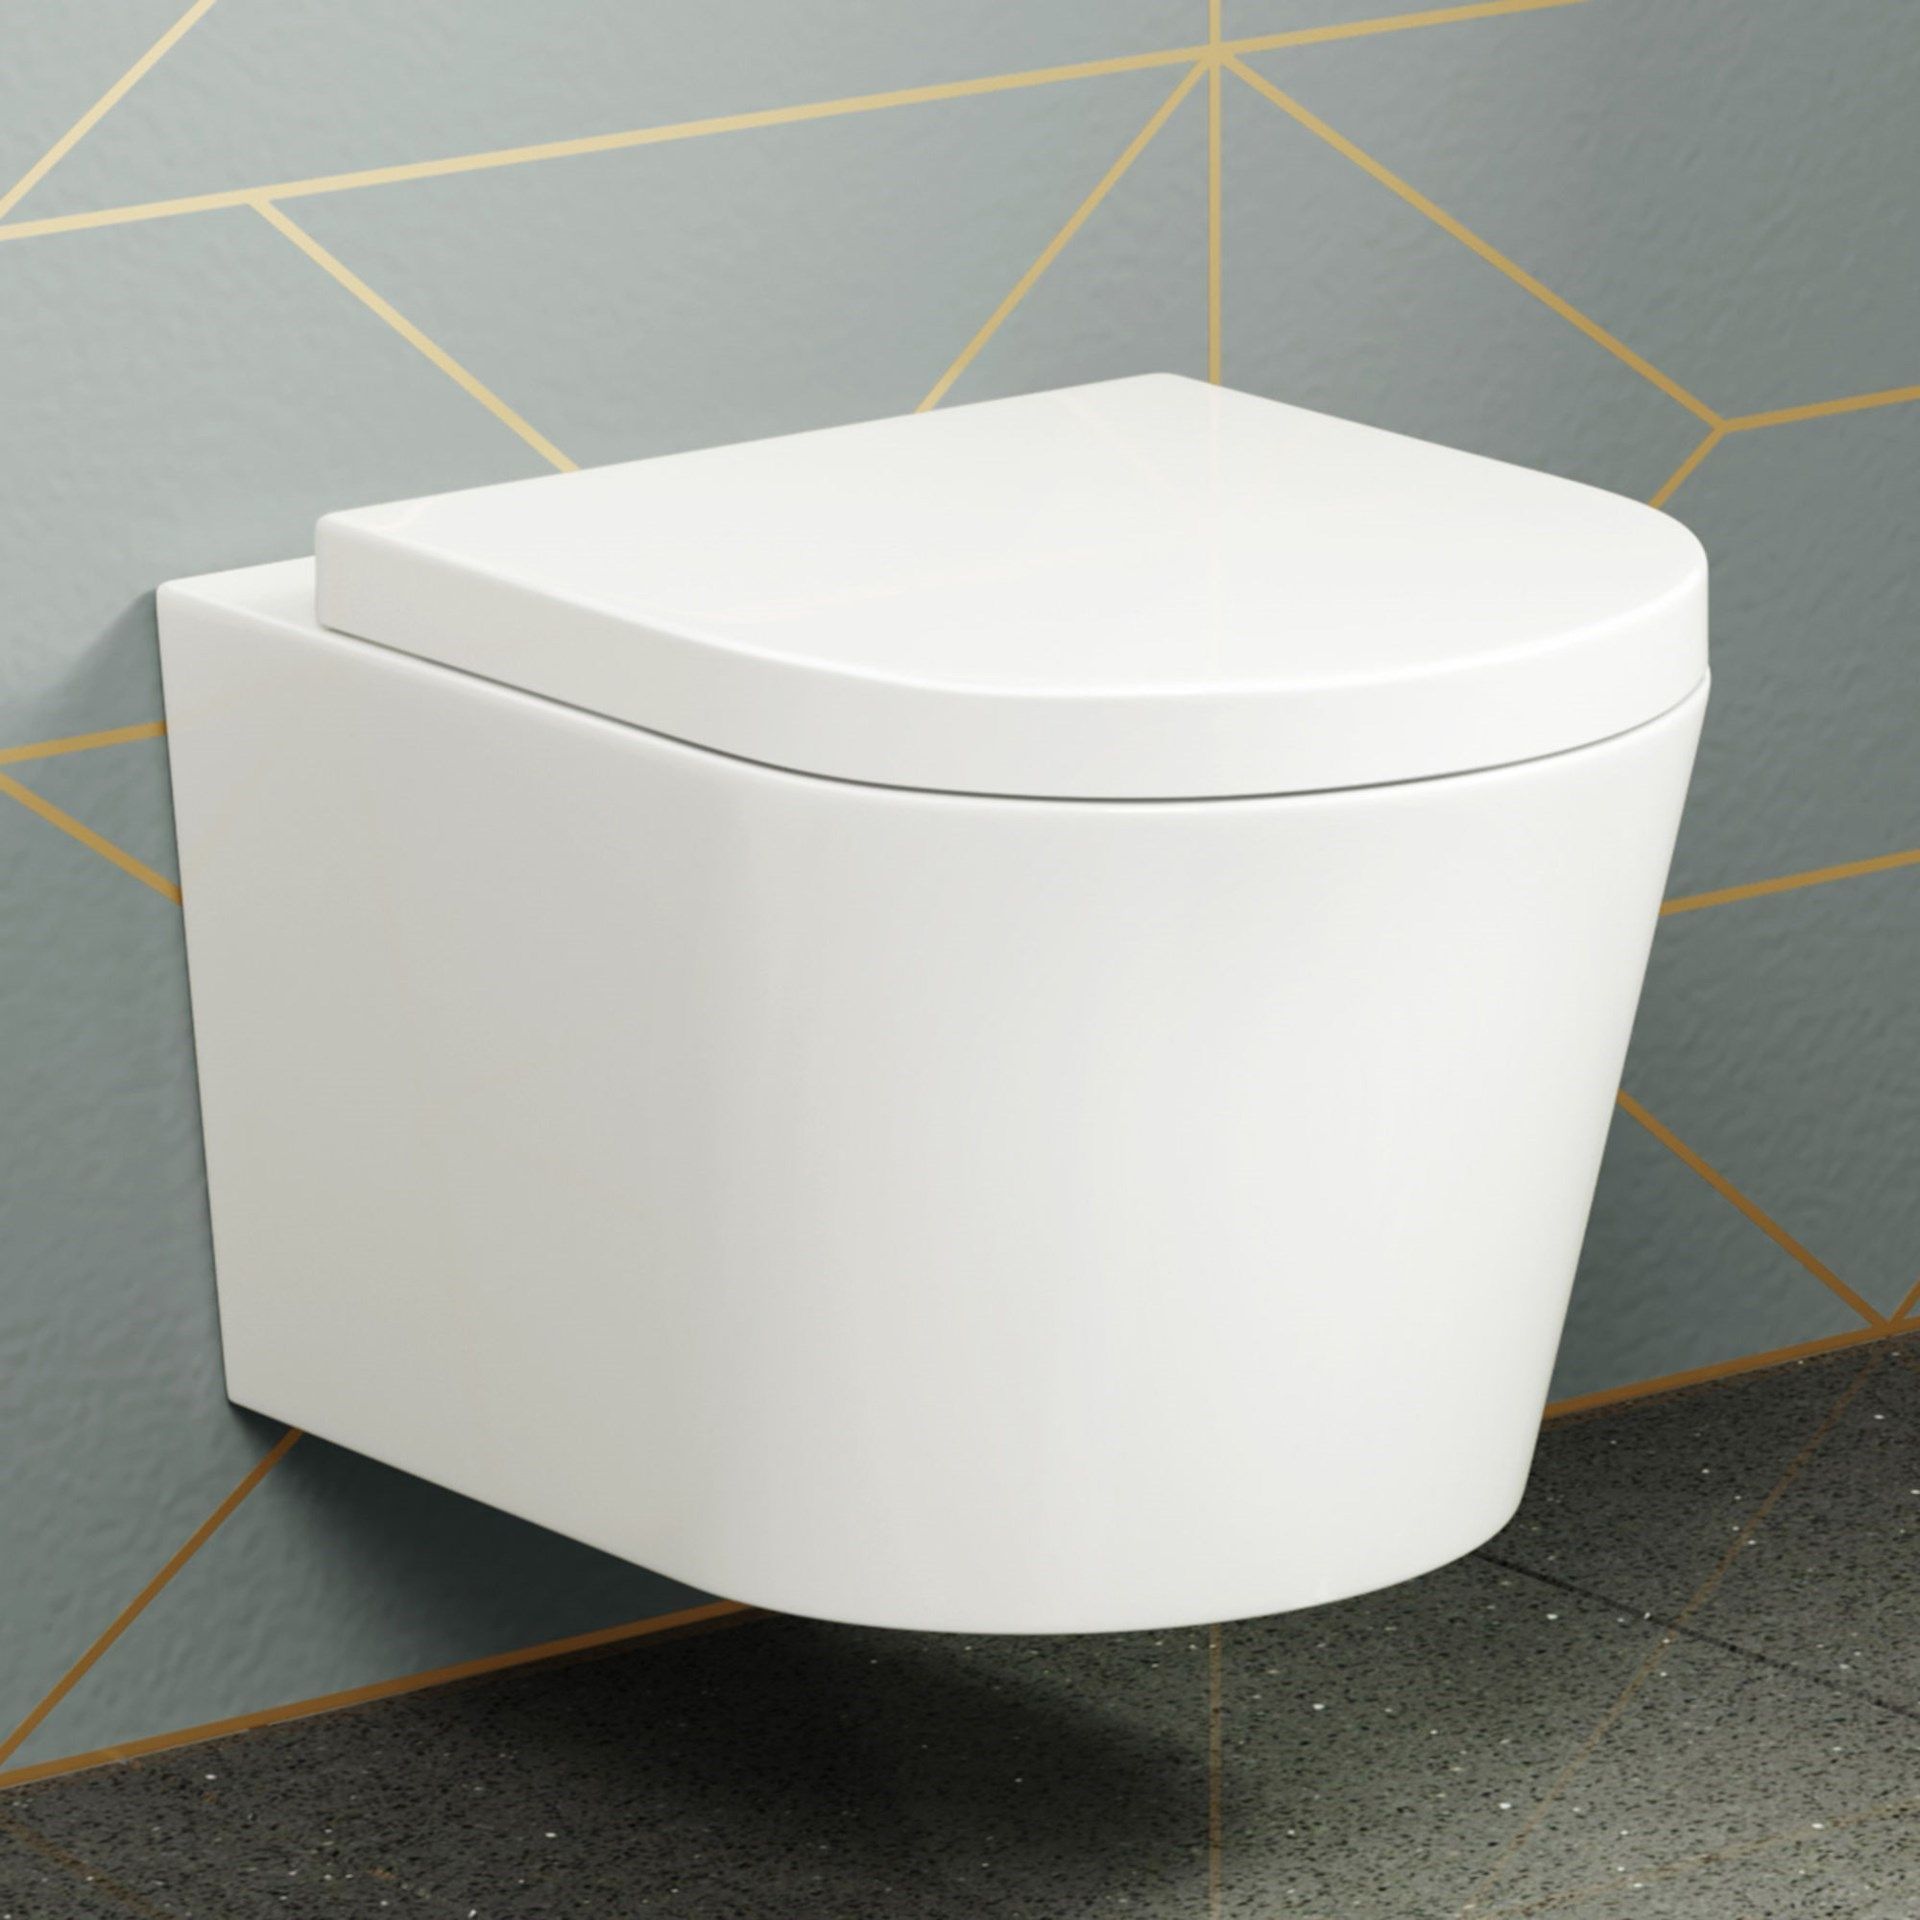 BRAND NEW BOXED Lyon II Wall Hung Toilet inc Luxury Soft Close Seat. RRP £349.99 each.